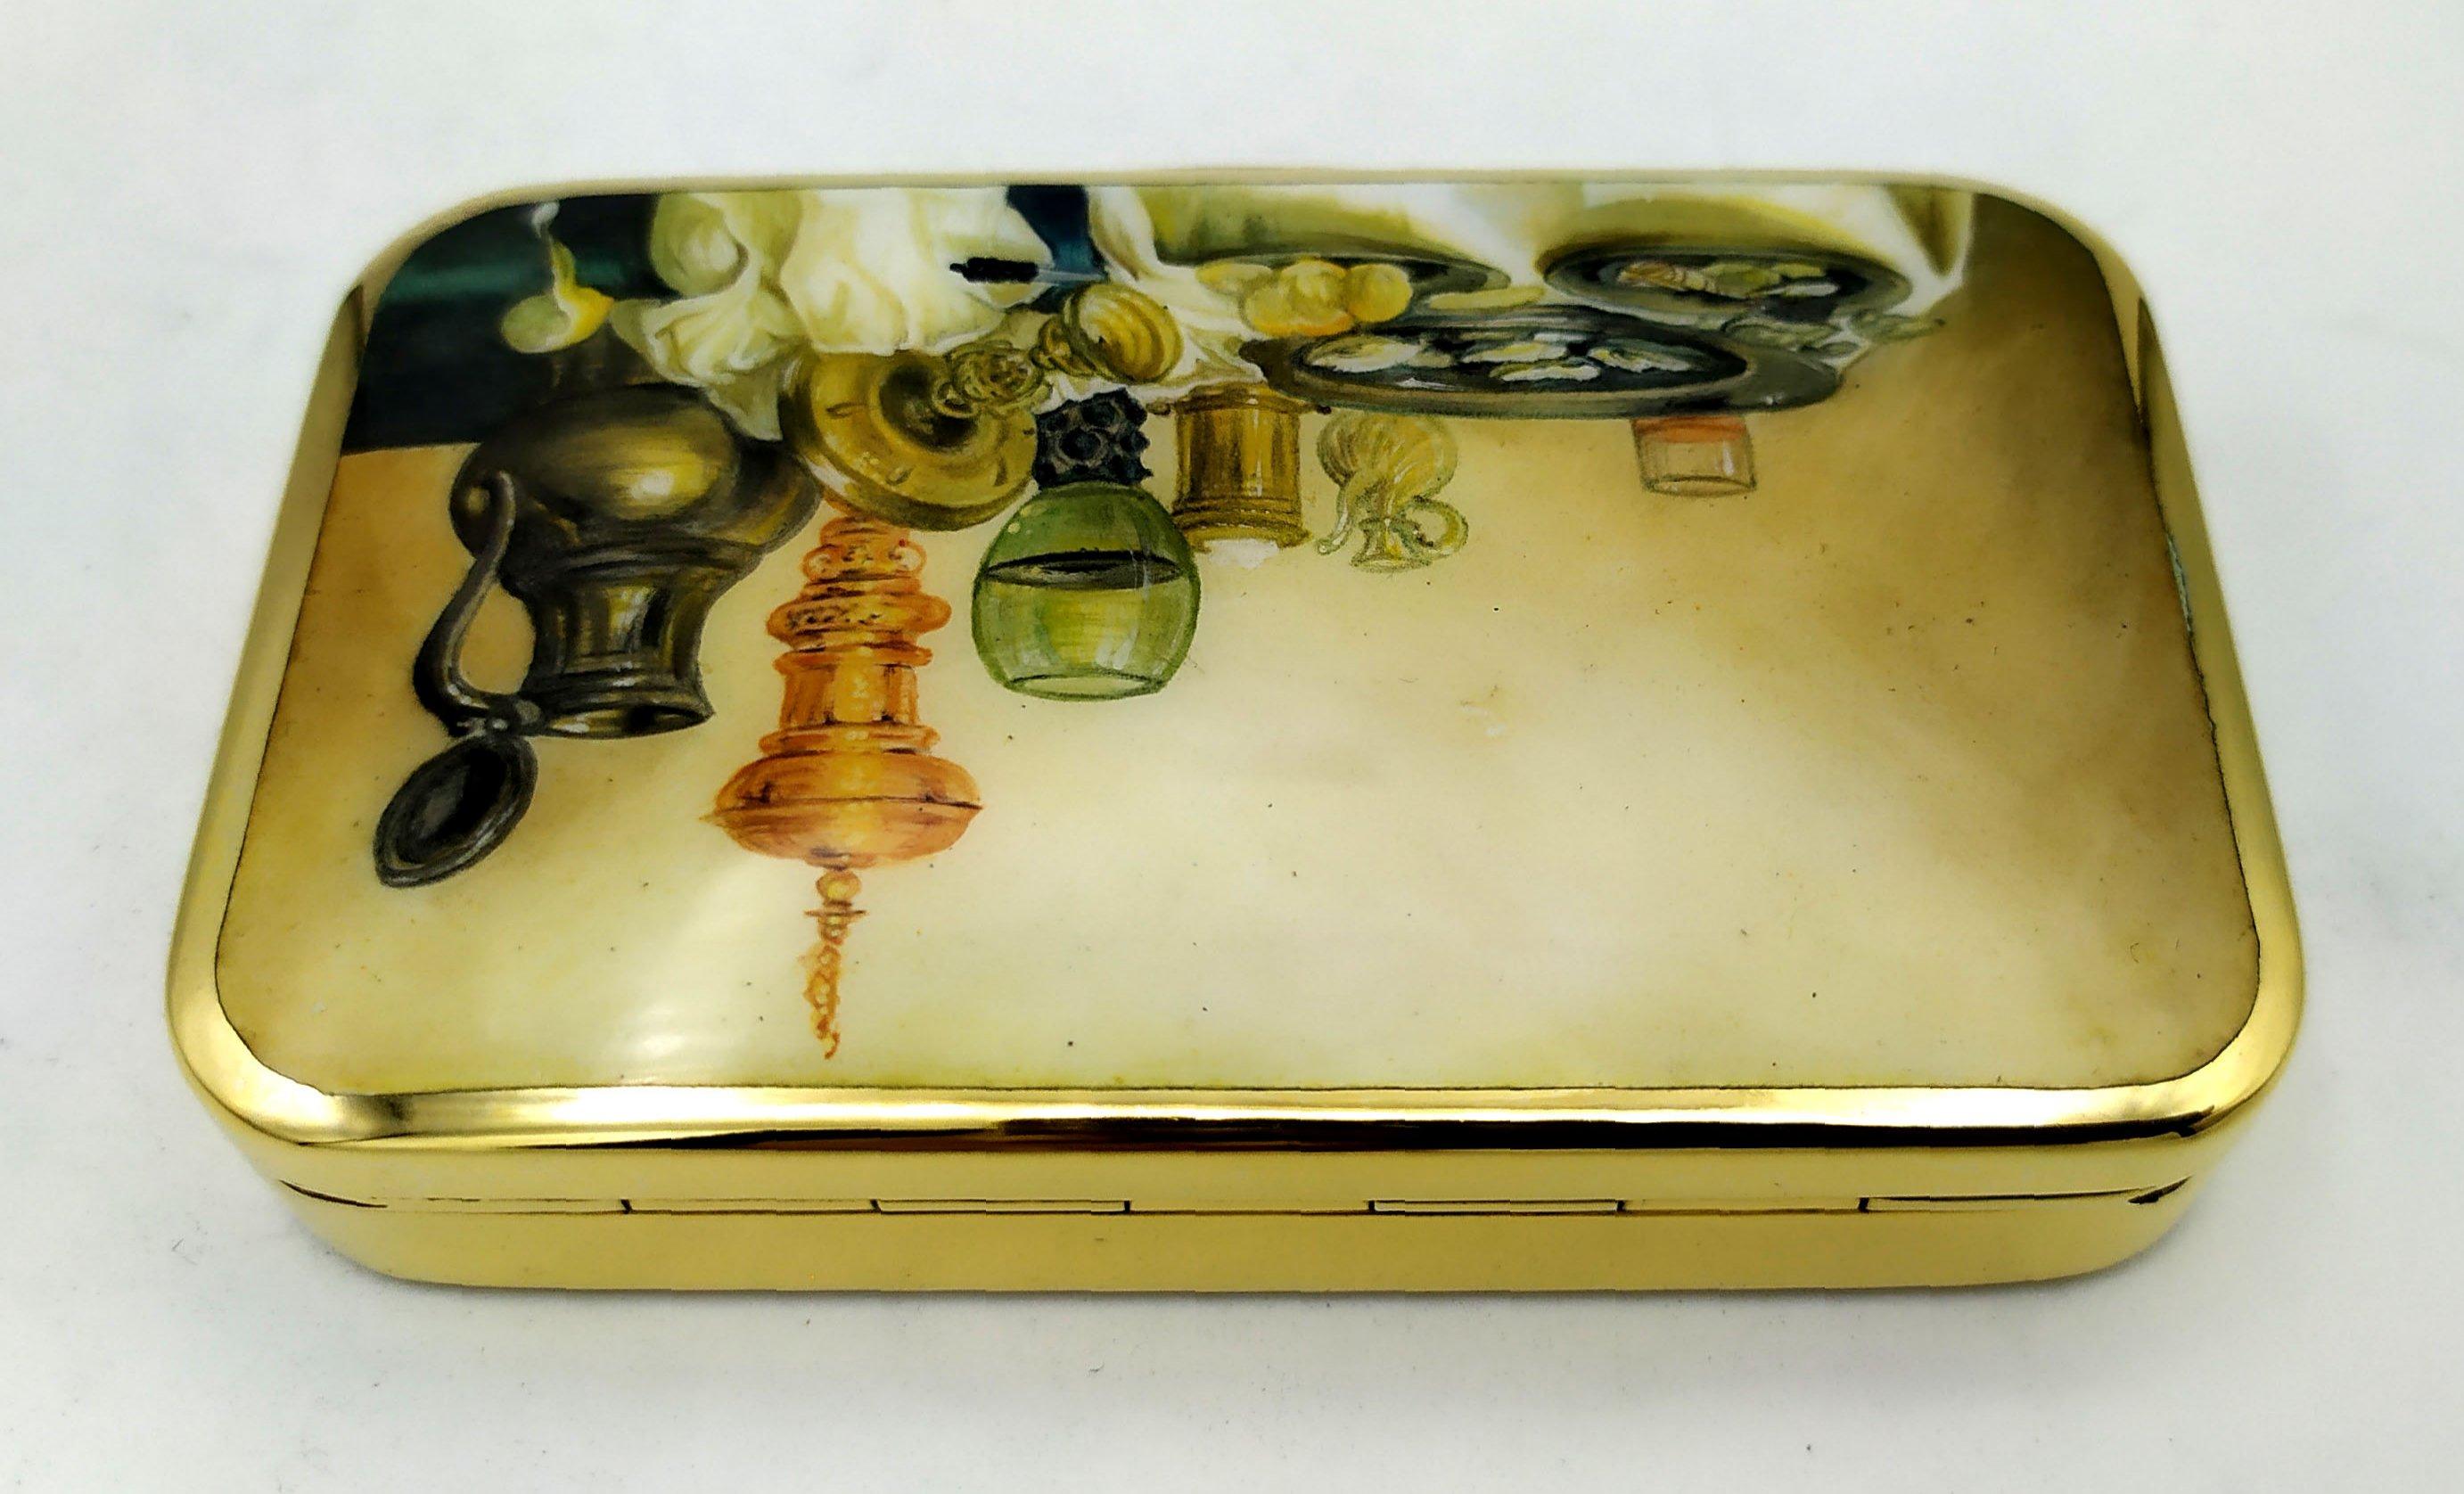 Hand-Painted Cigarette Case Fired Enamel with Still Life Miniature Sterling Silver Salimbeni For Sale